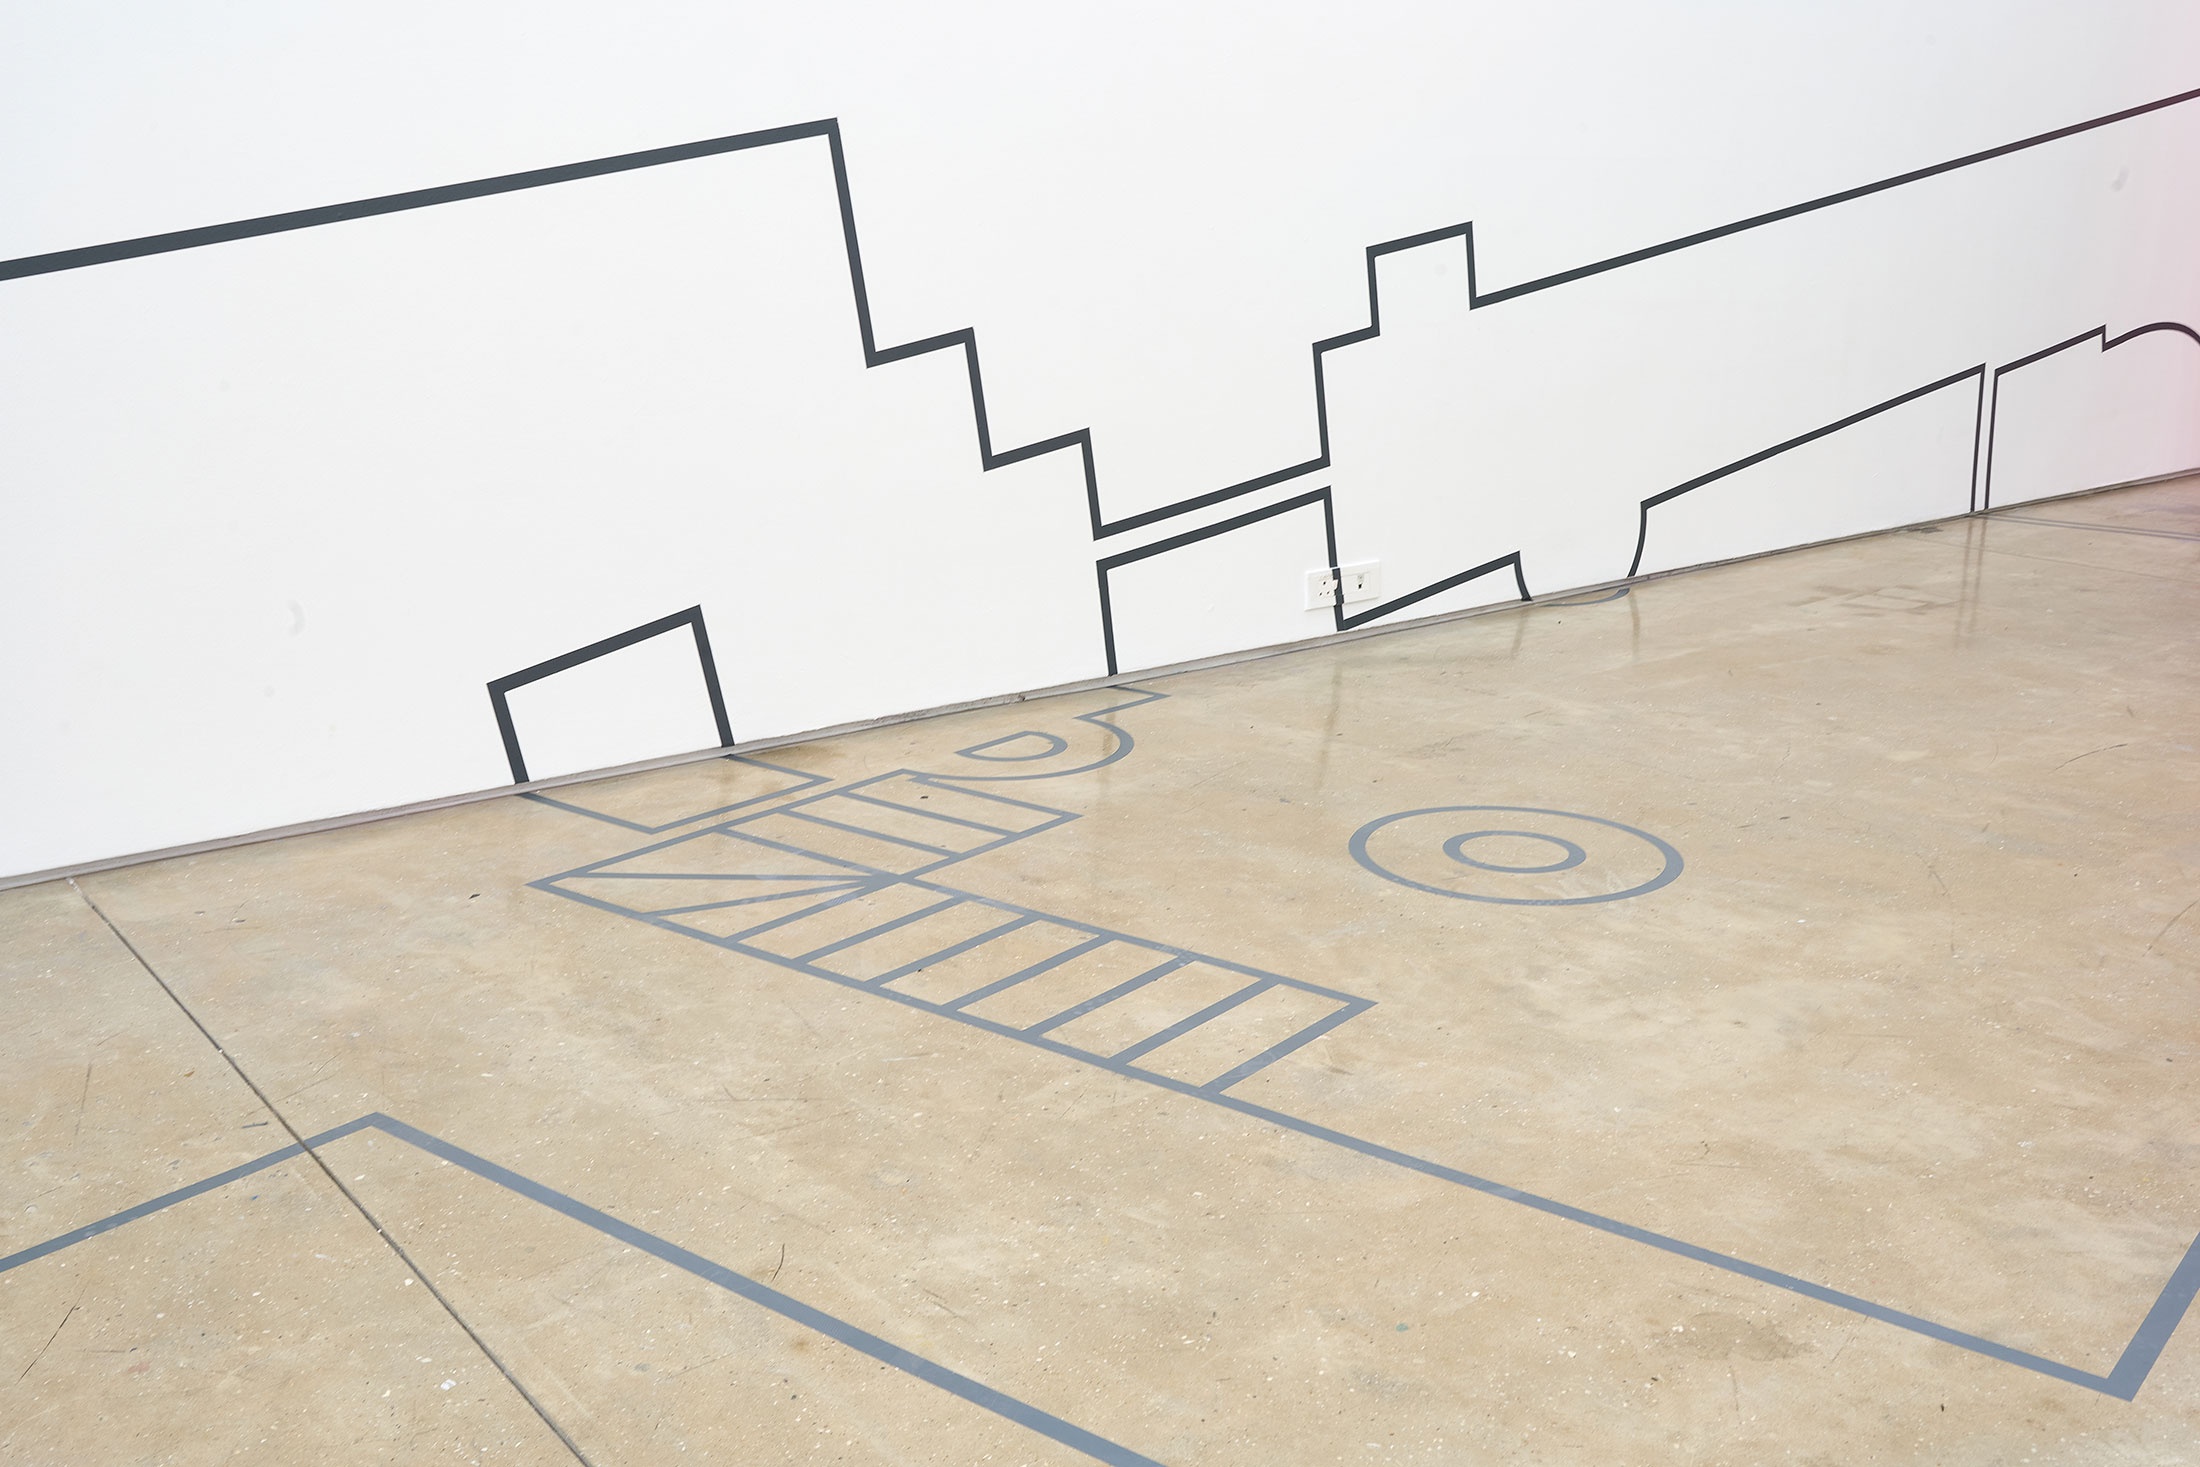 Installation photograph from the ‘Customs’ exhibition in A4’s Gallery. Dor Guez’s vinyl work ‘Double Stitch’ features vinyl line drawings that stretch across the gallery floor and wall.
